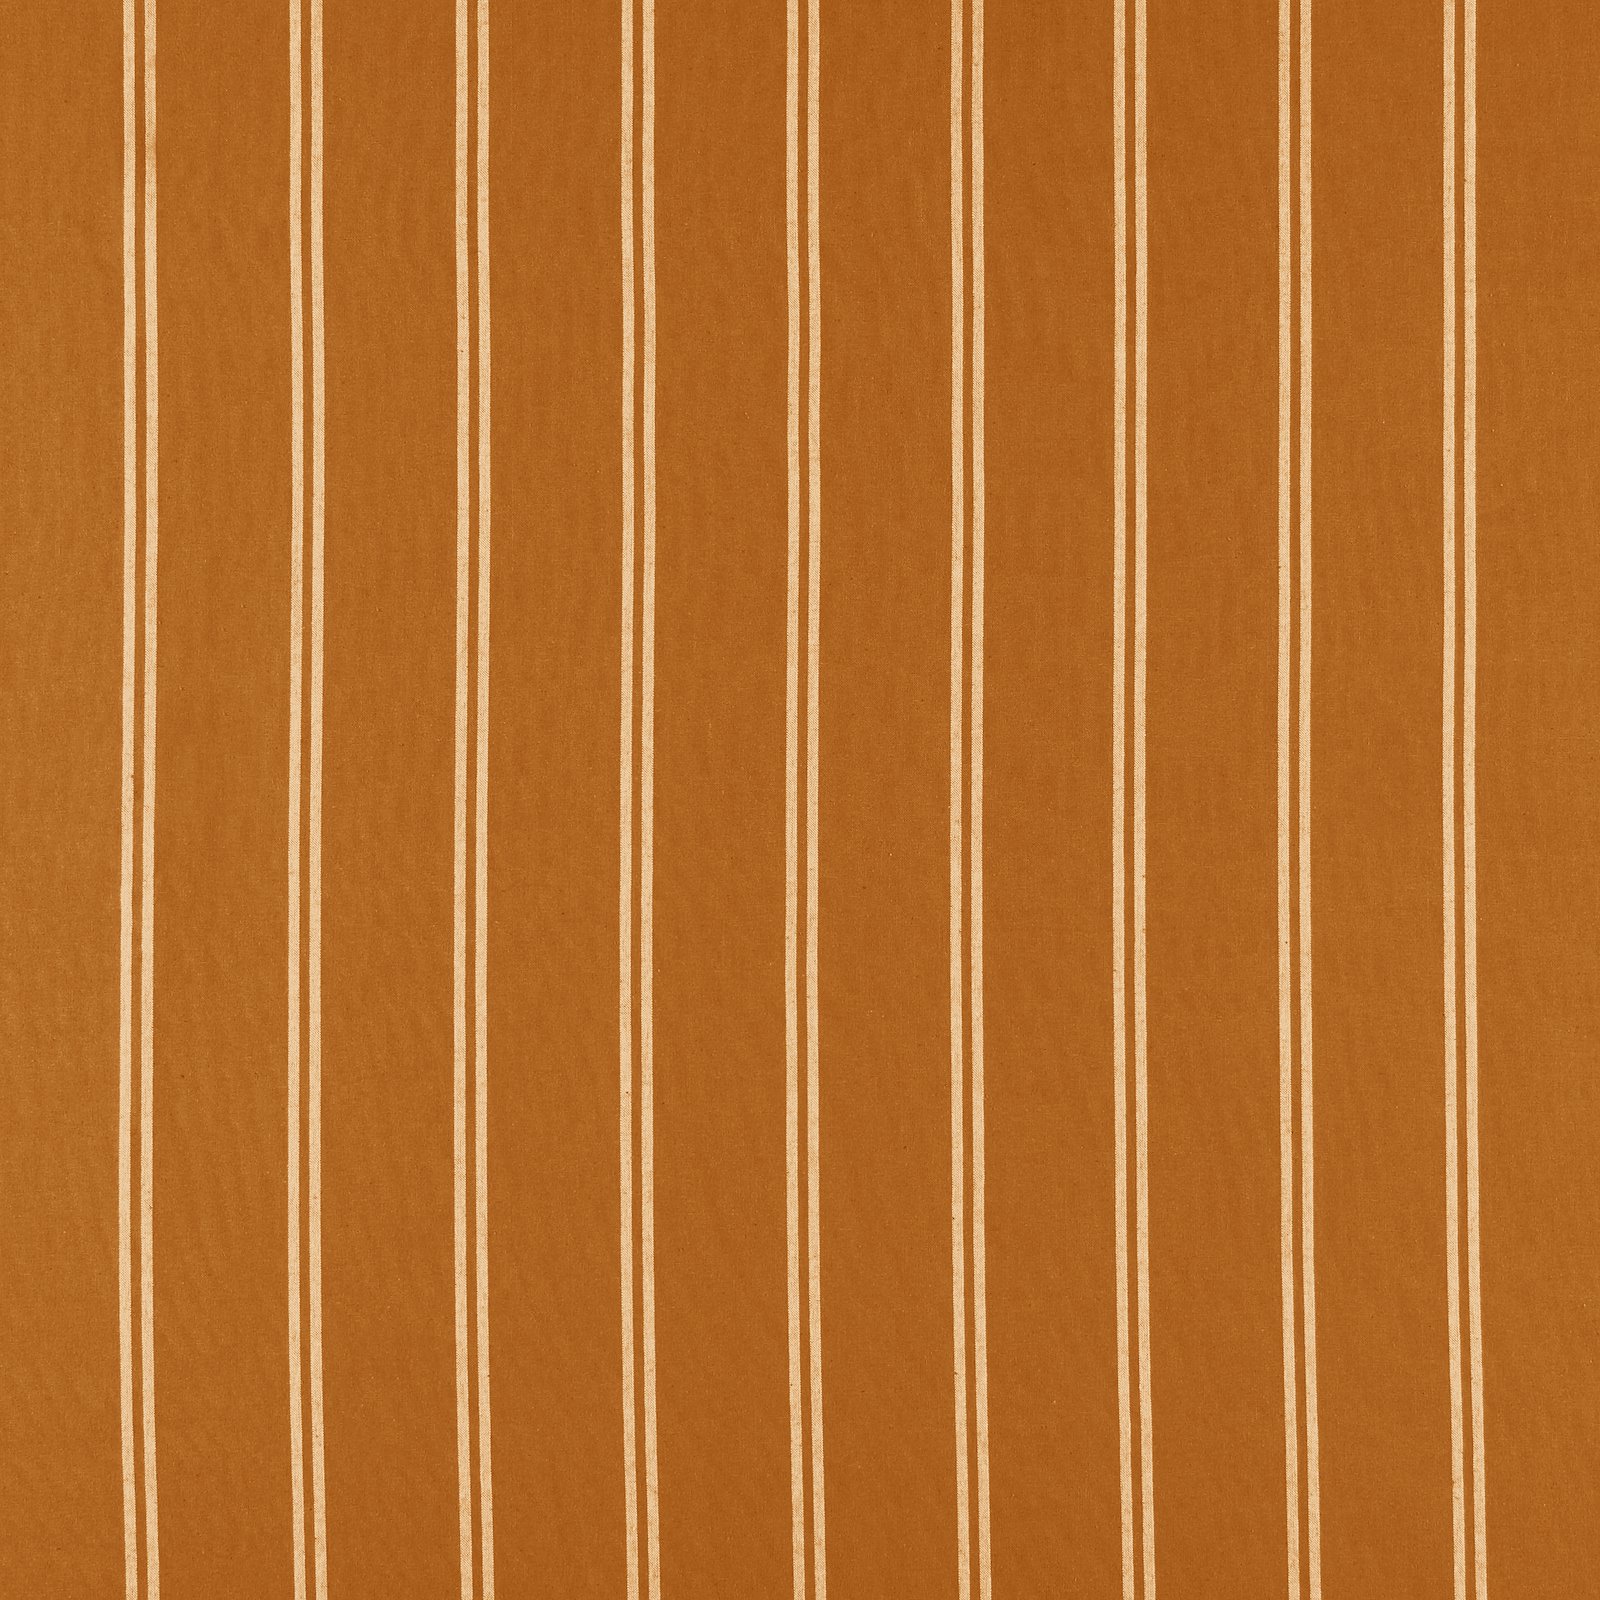 Woven yarn dyed golden brown stripe 816175_pack_sp